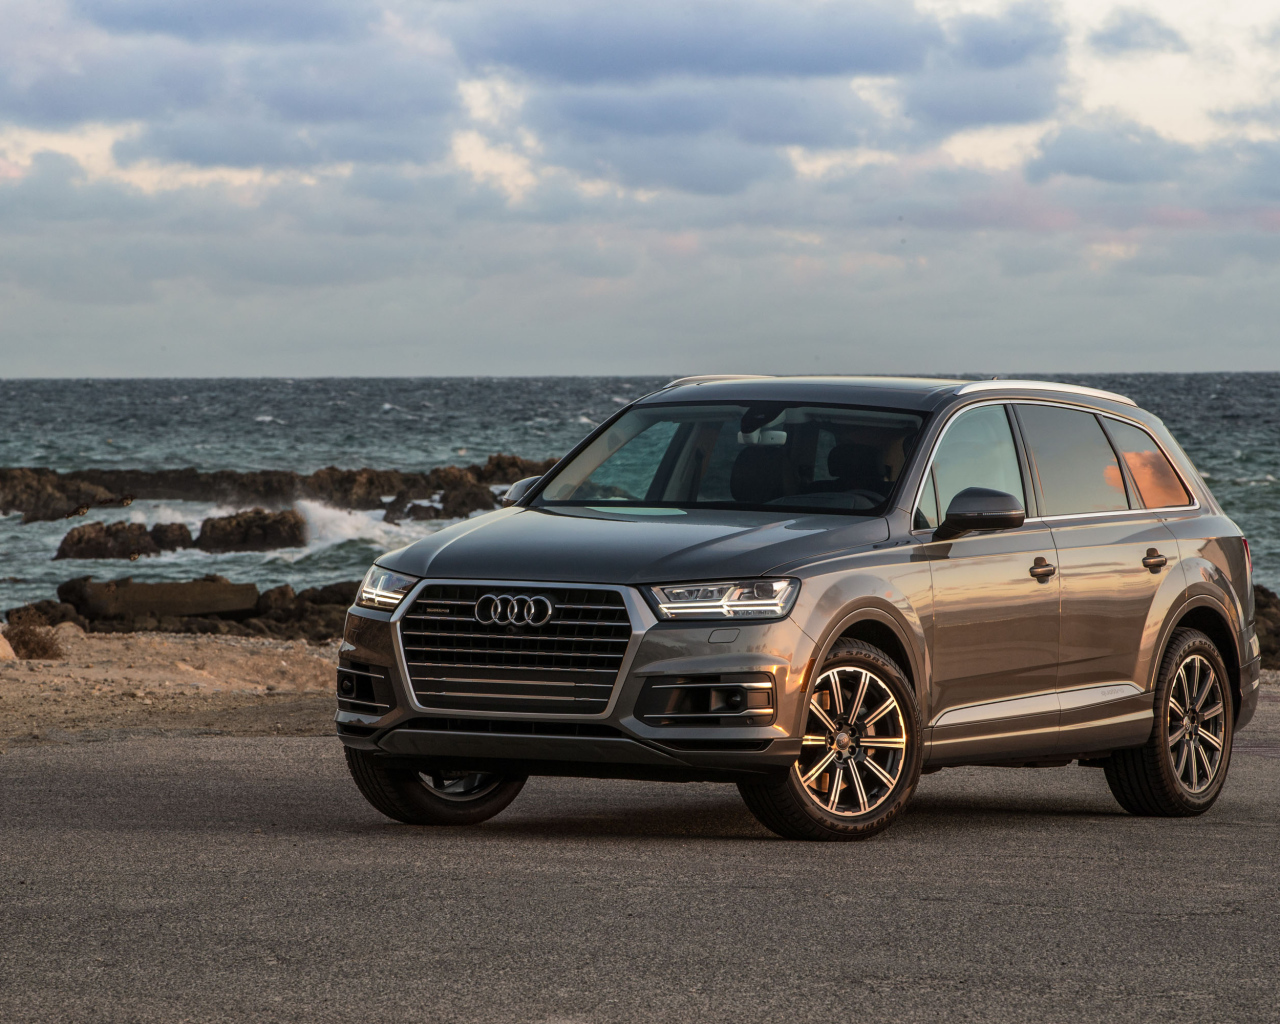 SUV Audi Q7, 2018 against the background of the ocean